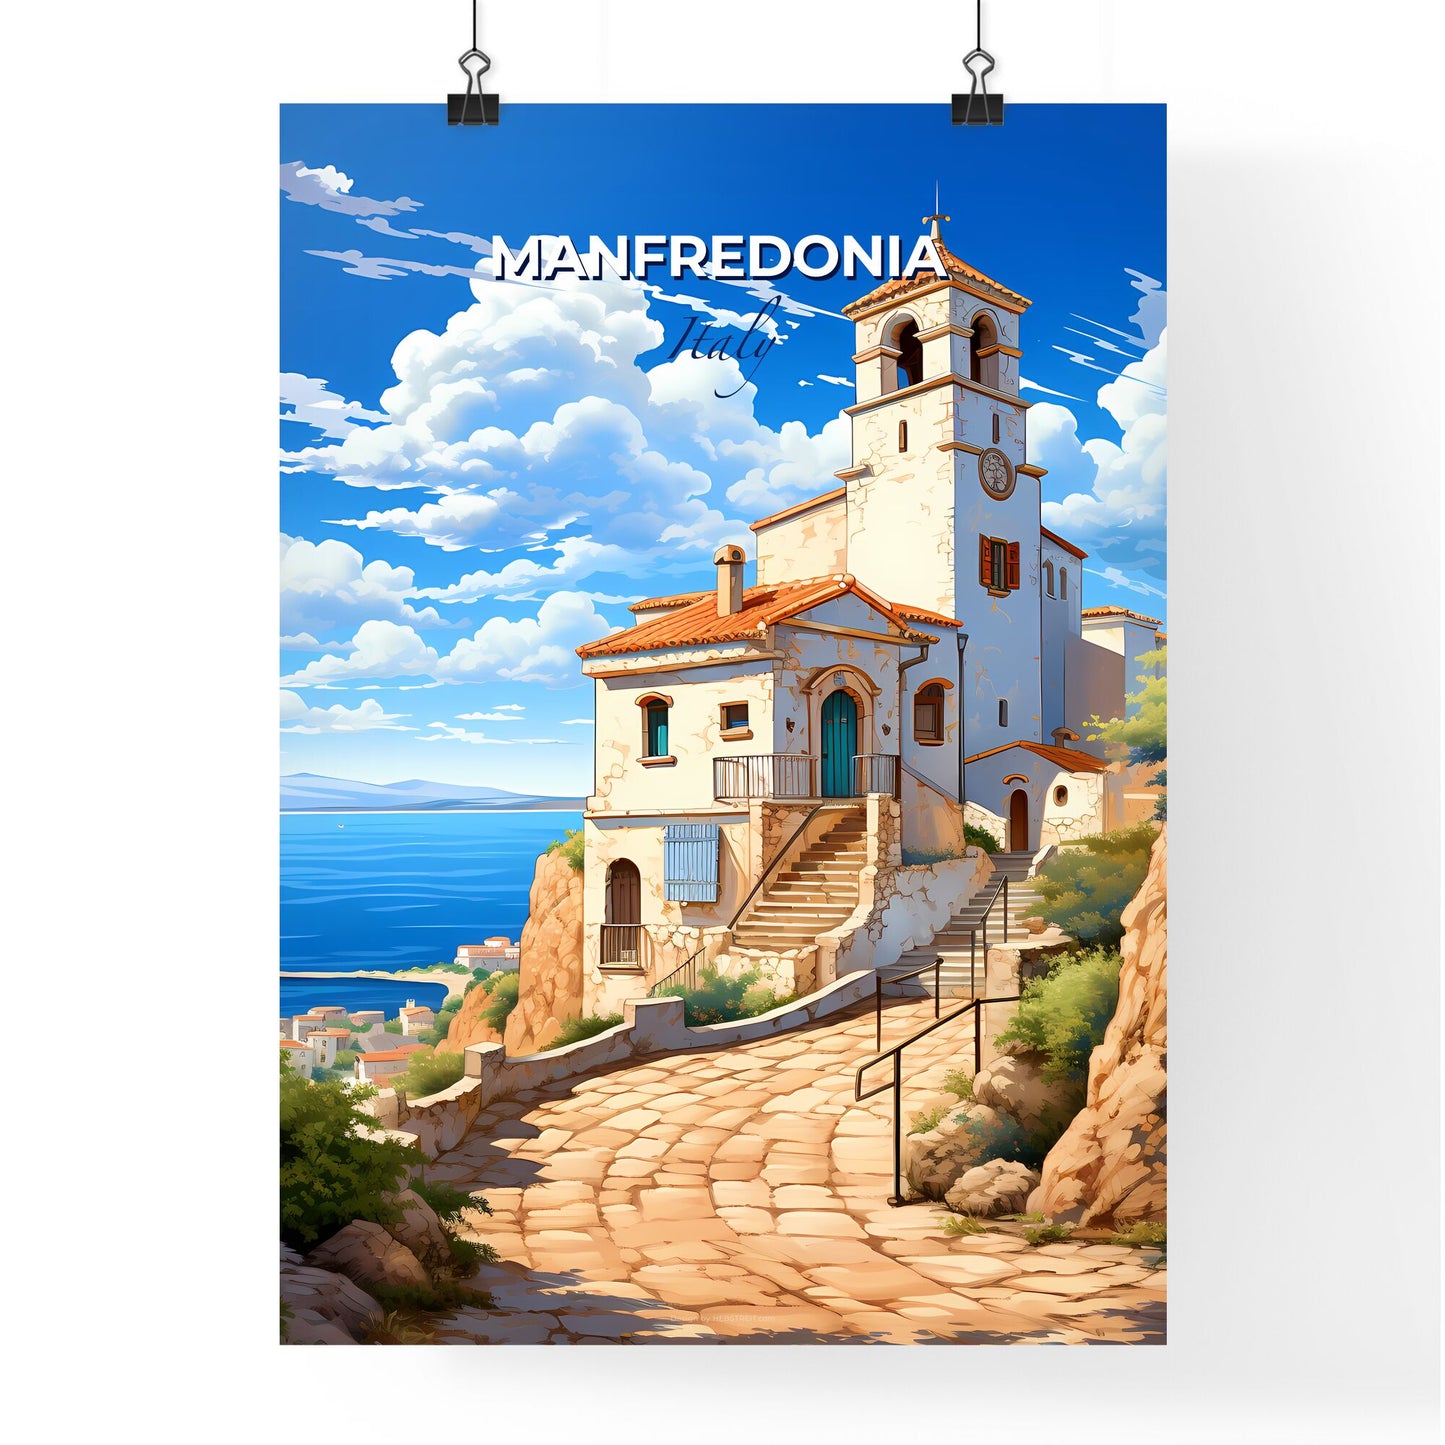 Manfredonia, Italy, A Poster of a building on a hill with a steeple and a body of water Default Title